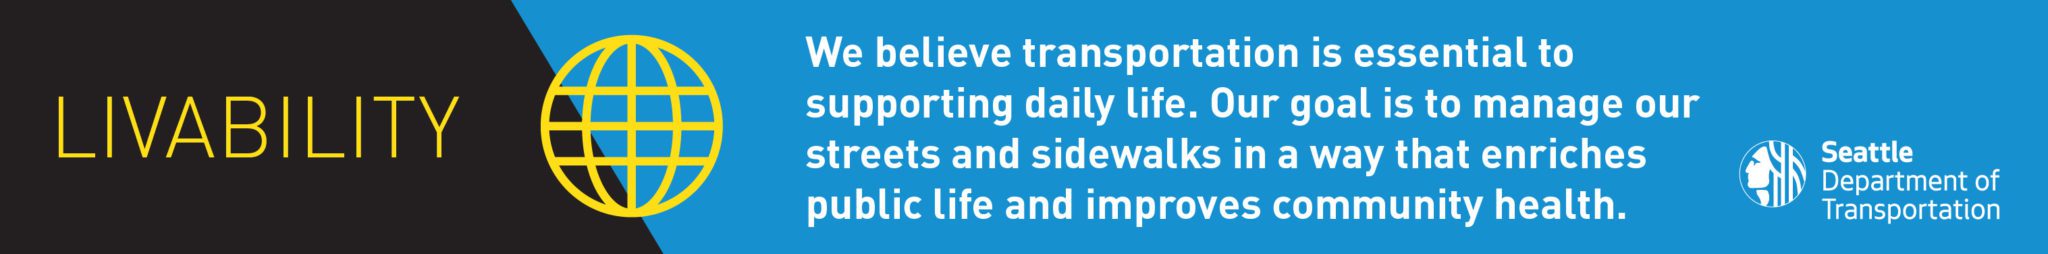 Livability is one of SDOT's core values and goals. This graphic icon includes the word "Livability" with a brief description of its meaning, and the SDOT logo.